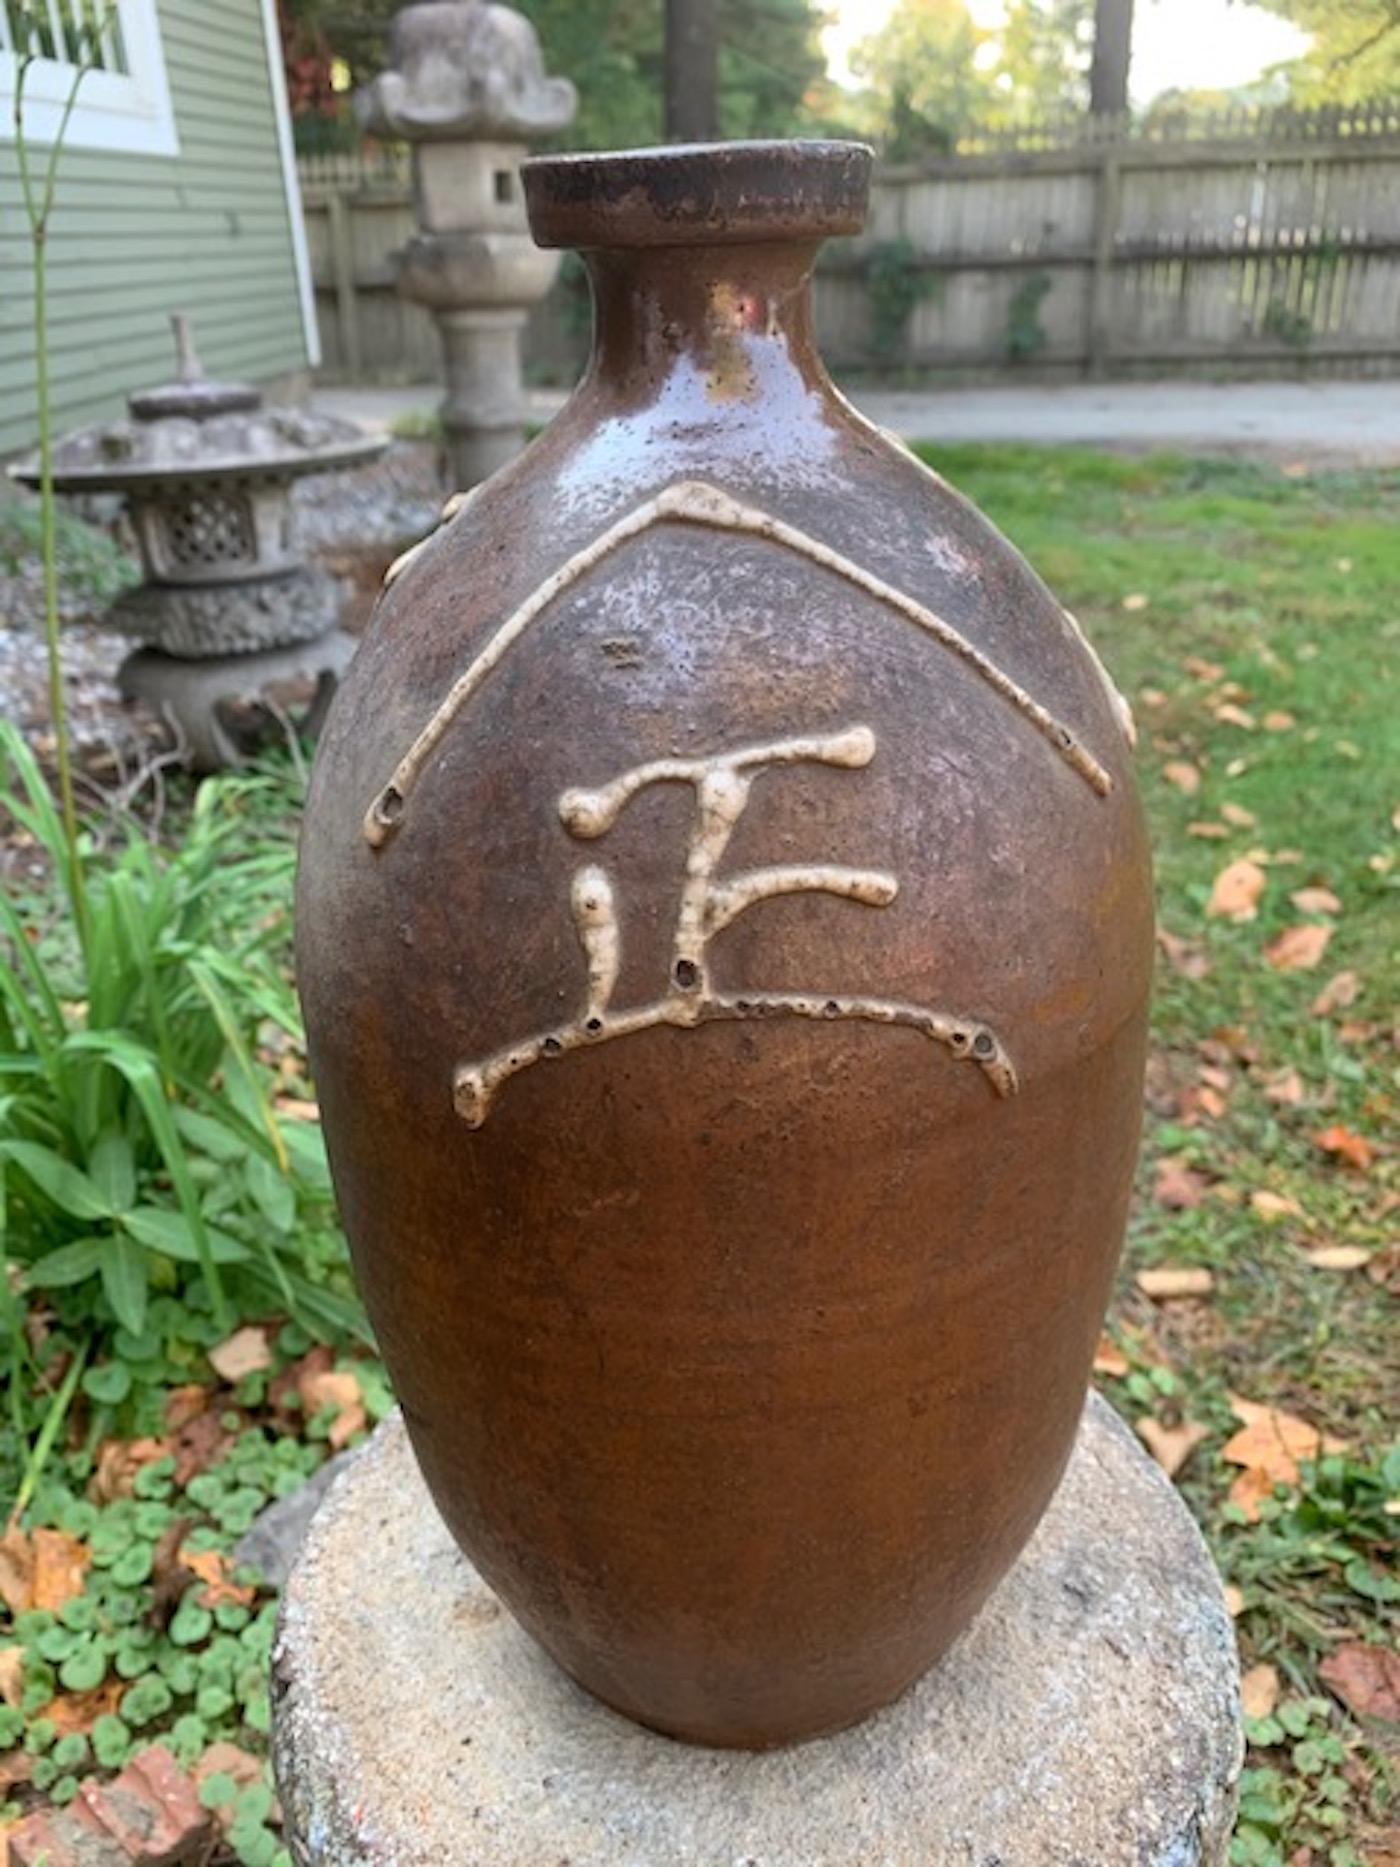 Japanese Tokkuri, (Sake or shochu bottle) with high relief glazed characters. Very special Tokkuri with high relief glazed characters indicating the shop and makers name. This tokkuri was made in the mid-late 19th century.